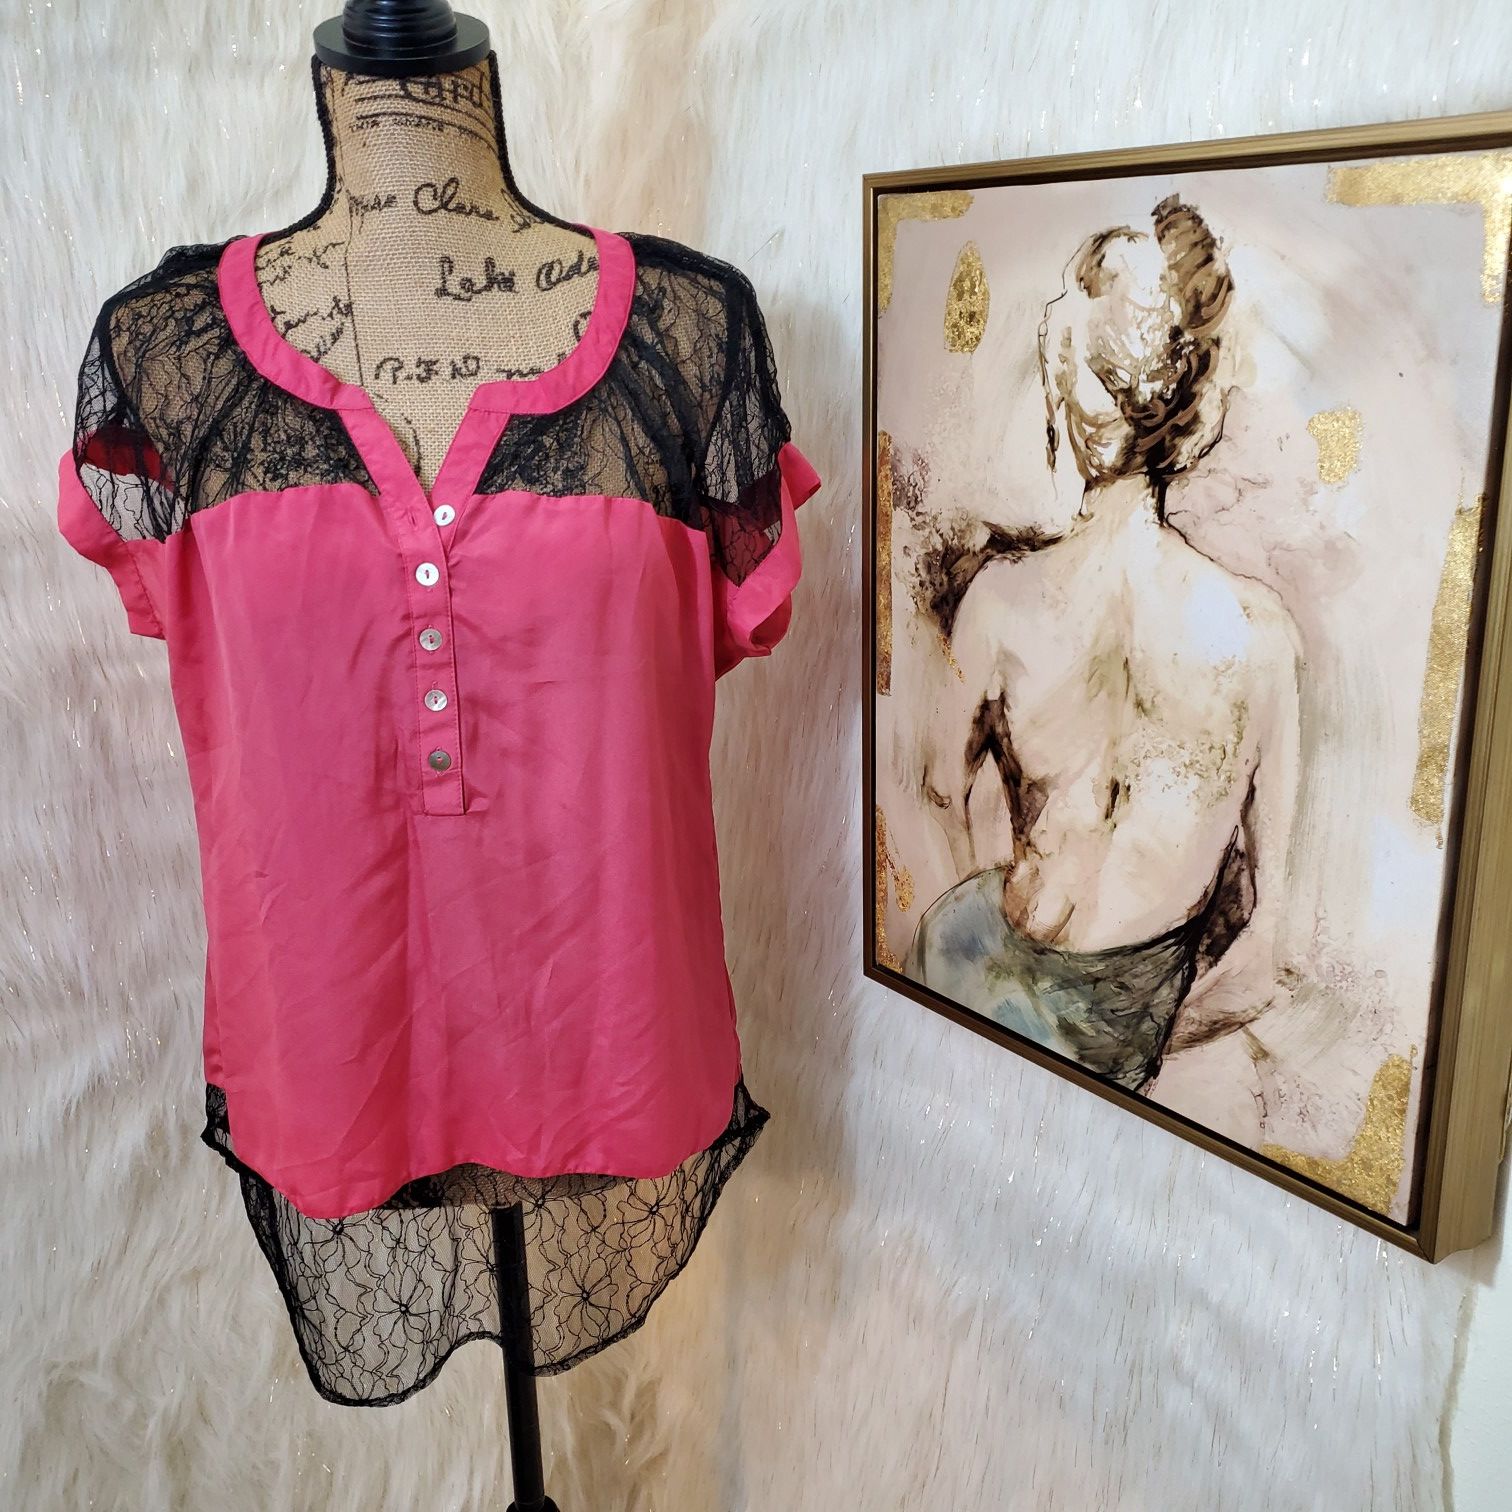 Small Charming Charlie pink & lace blouse